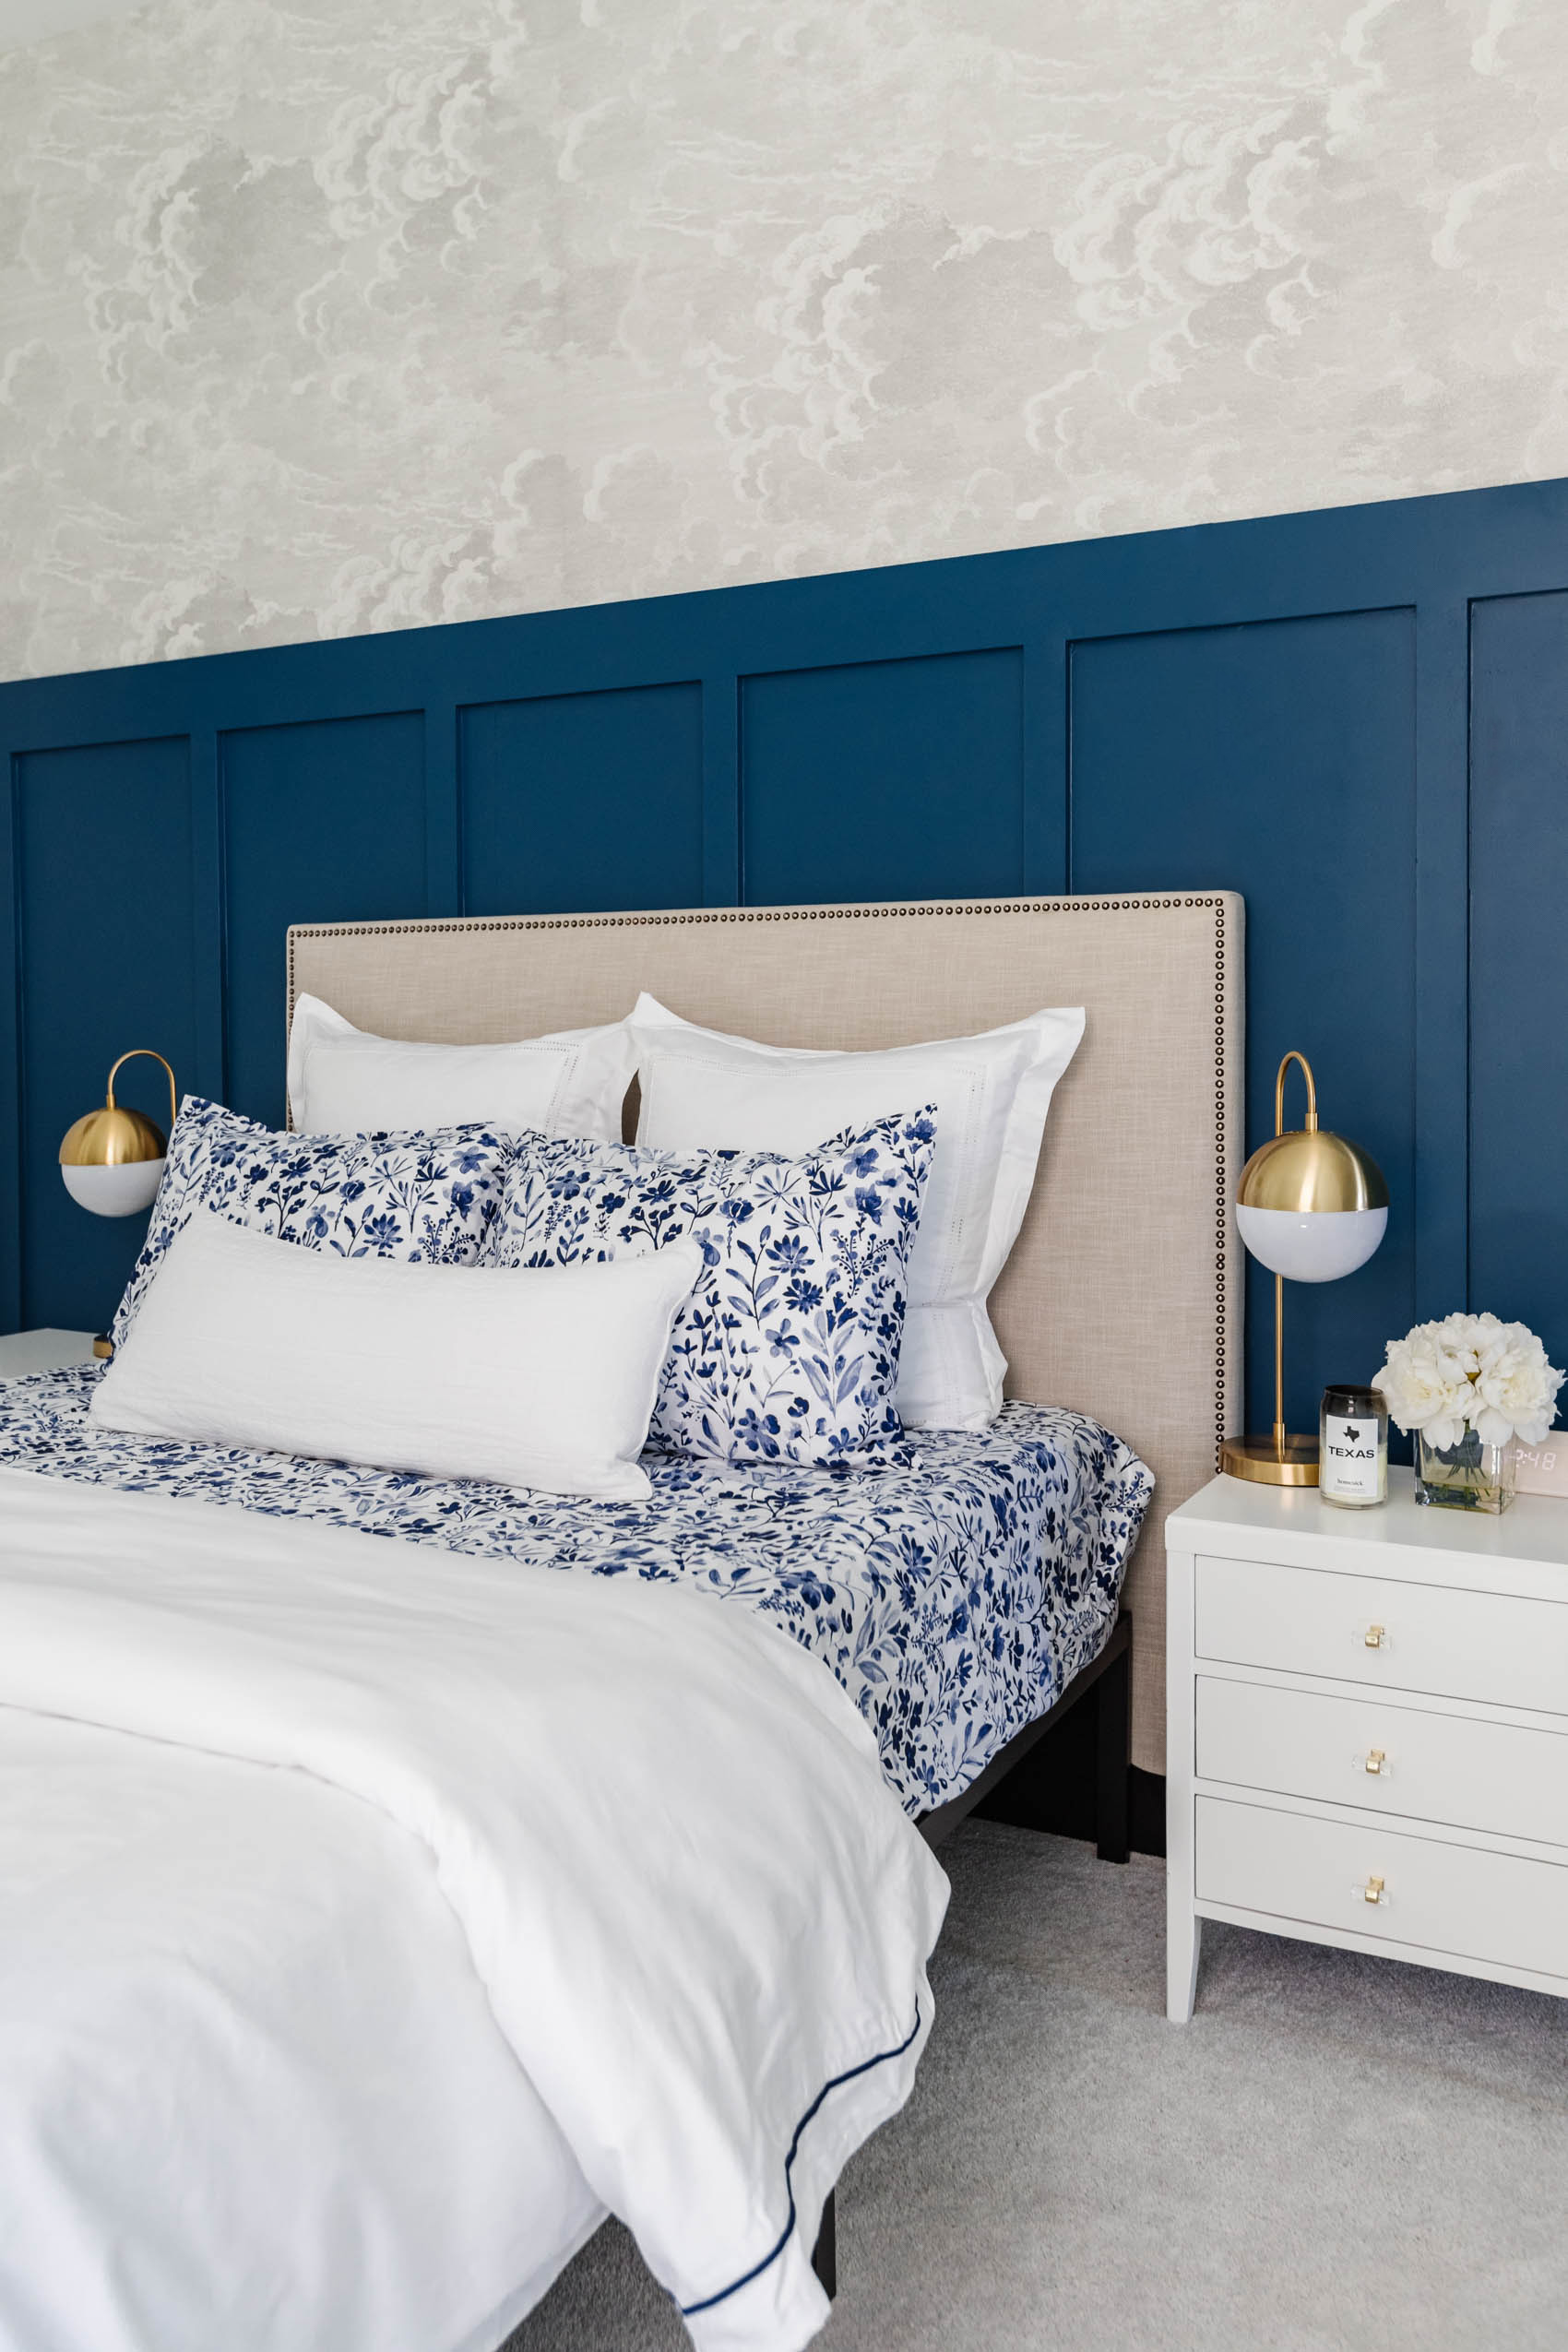 Guest bedroom with board and batten in PPG Chinese Porcelain with Cole & Son nuvolette wallpaper, west elm upholstered headboard, boll & branch botanical print bedsheets, white nightstands and brass table lamps